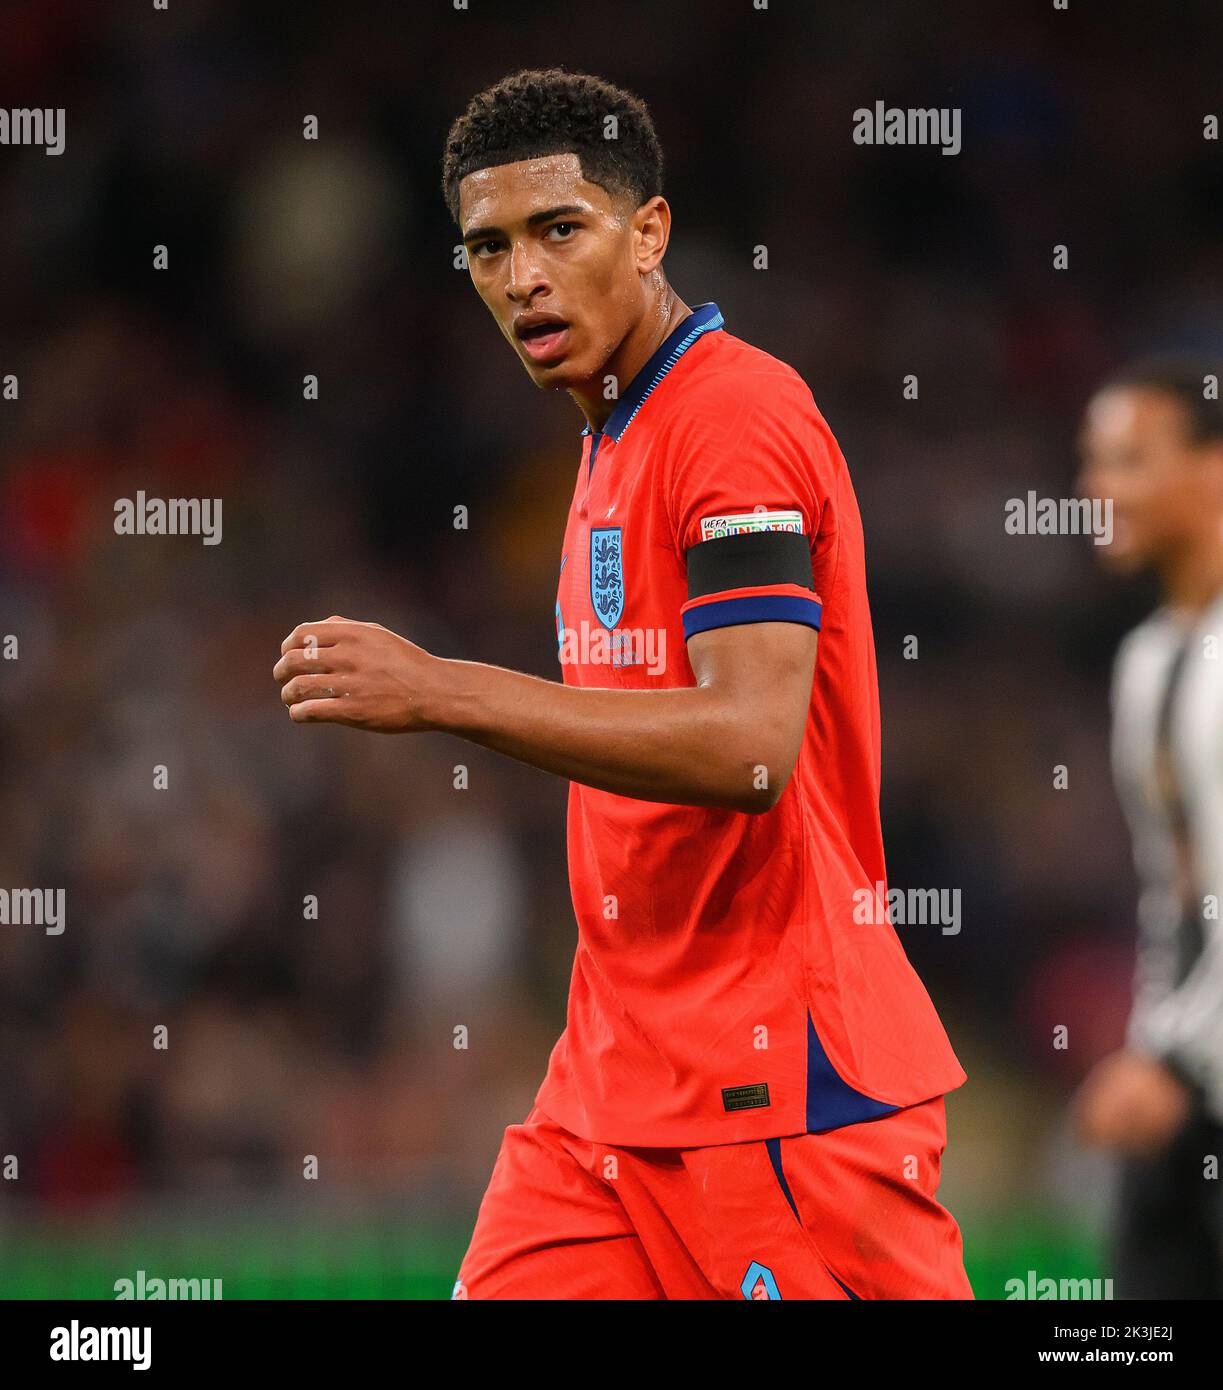 26 Sep 2022 - England v Germany - UEFA Nations League - League A - Group 3 - Wembley Stadium  England's Jude Bellingham during the UEFA Nations League match against Germany. Picture : Mark Pain / Alamy Live News Stock Photo